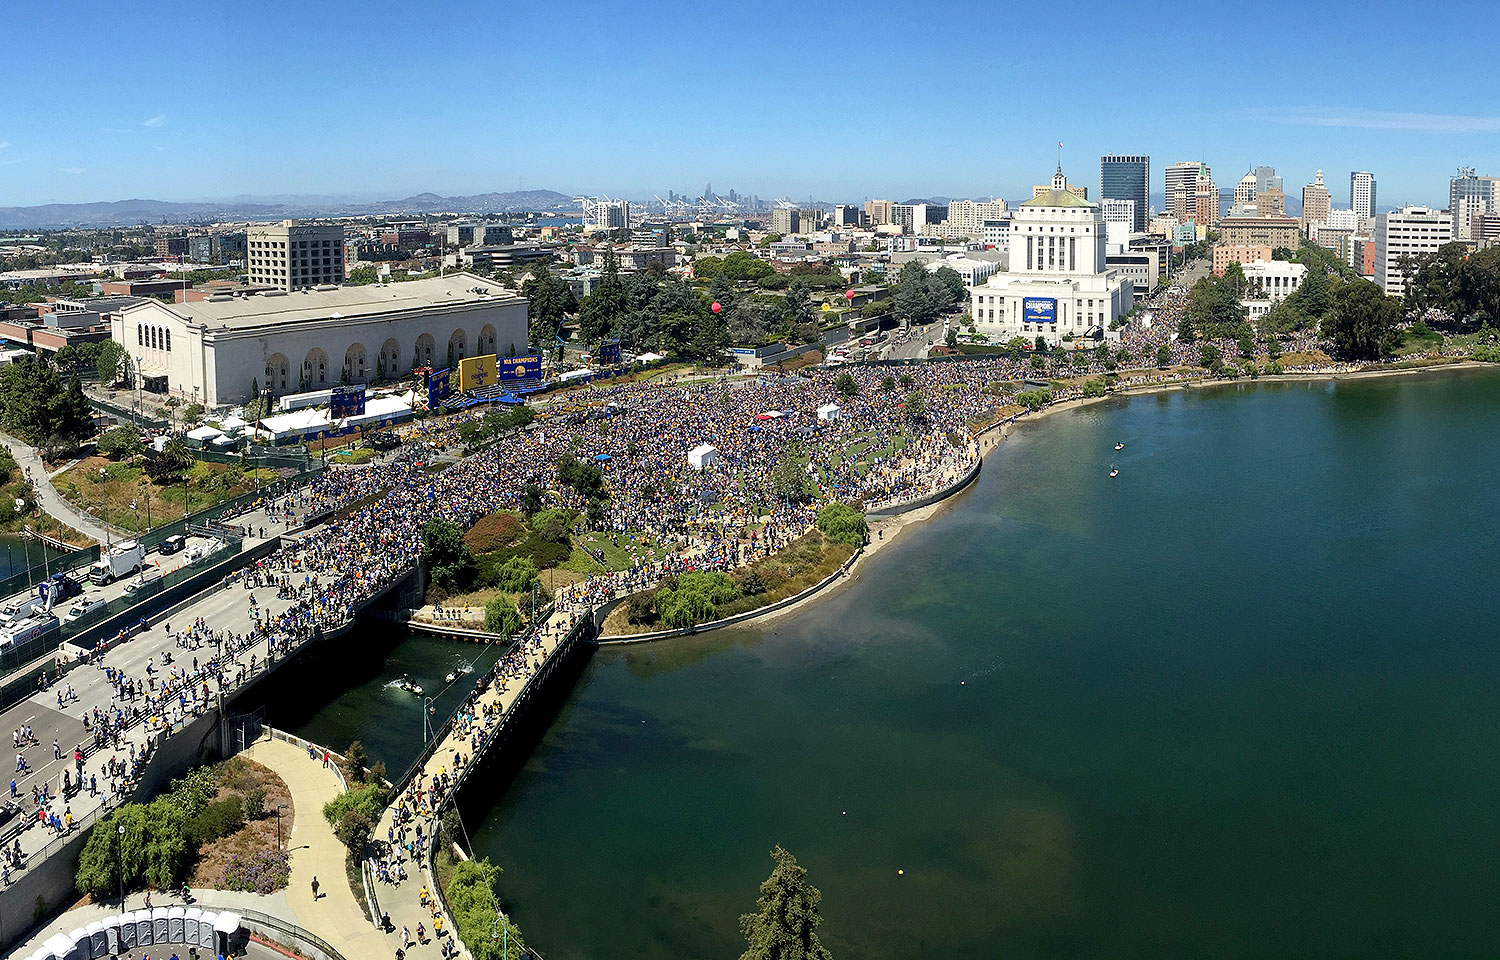 The scene in Oakland just yesterday. Wow